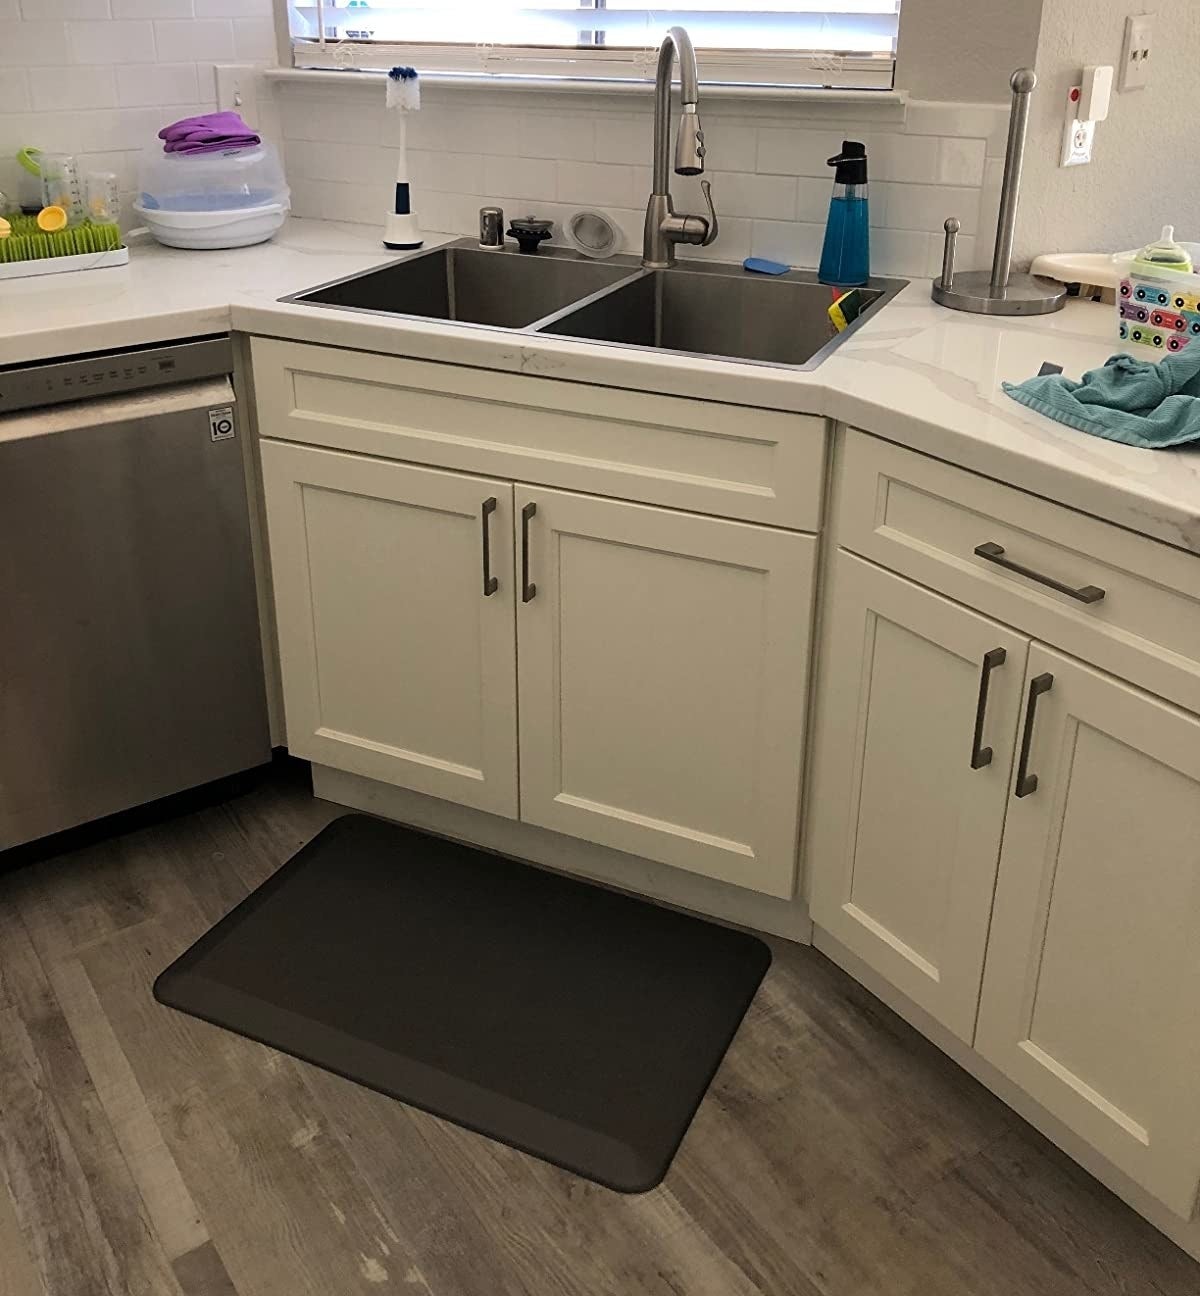 reviewer image of black anti-fatigue mat in front of kitchen sink